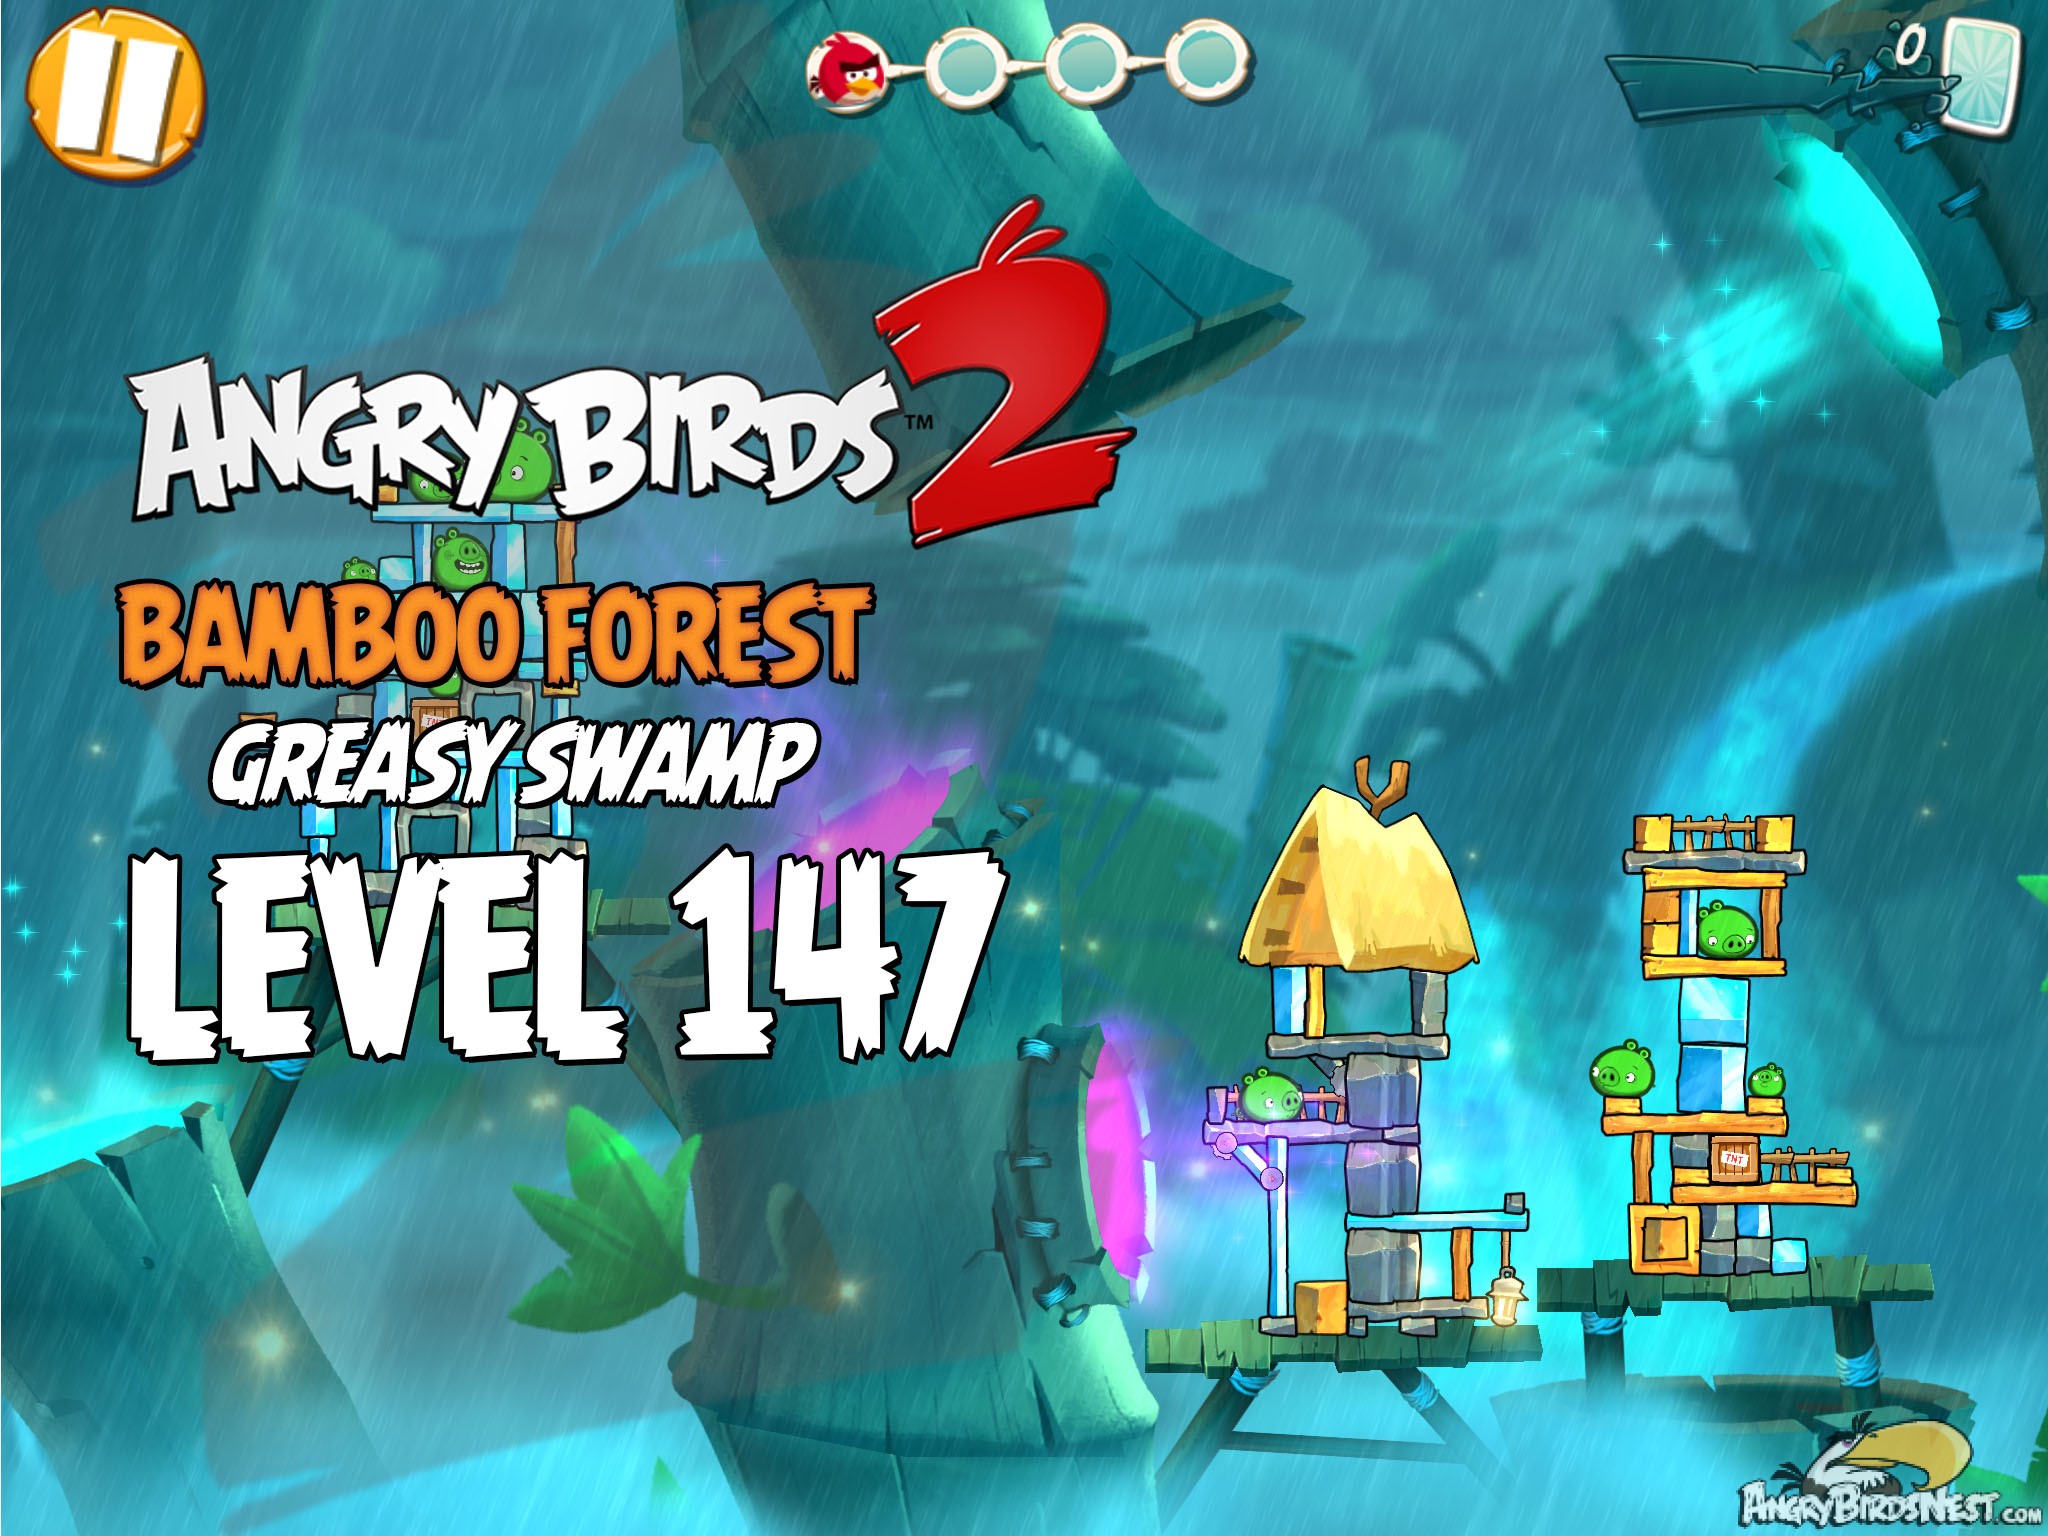 Angry Birds 2 Bamboo Forest Greasy Swamp Level 147